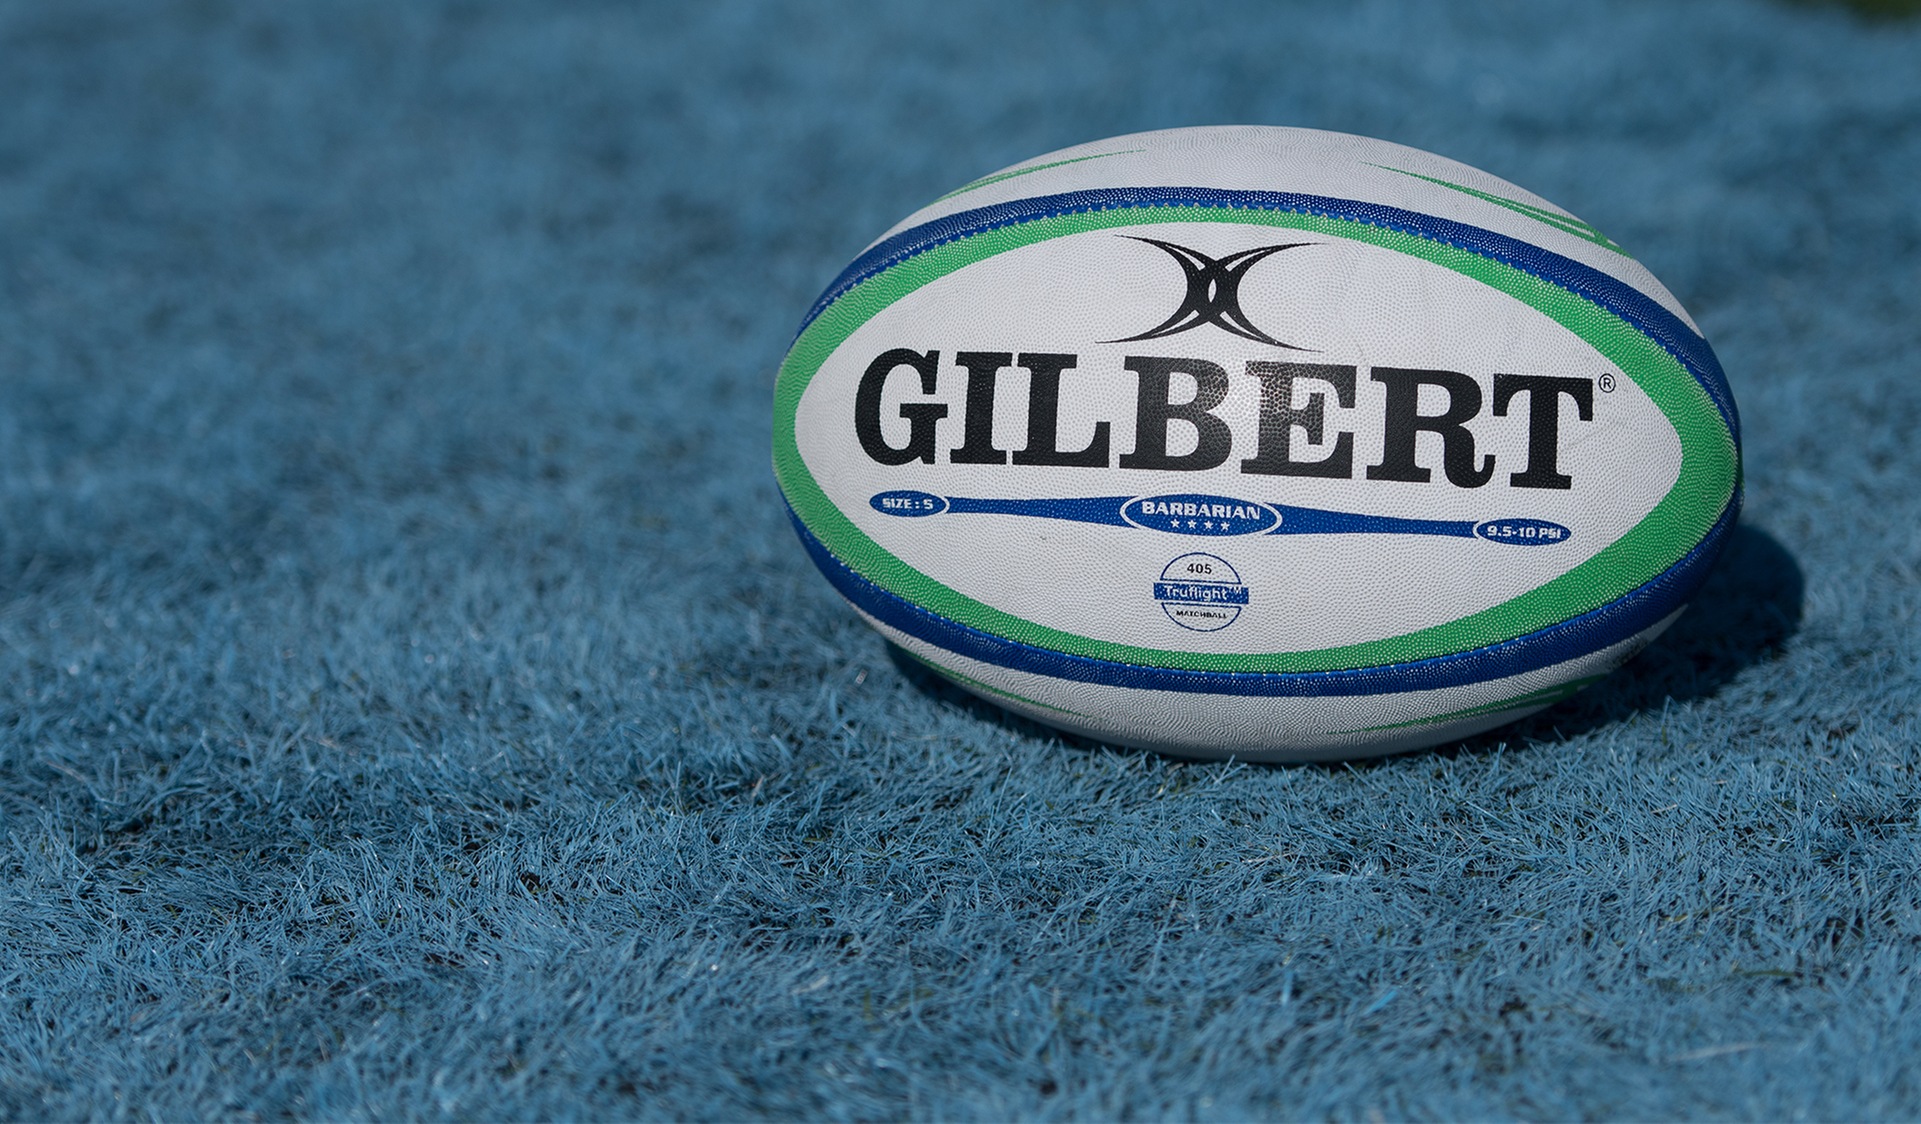 Men's Rugby Release Open Tryout Dates